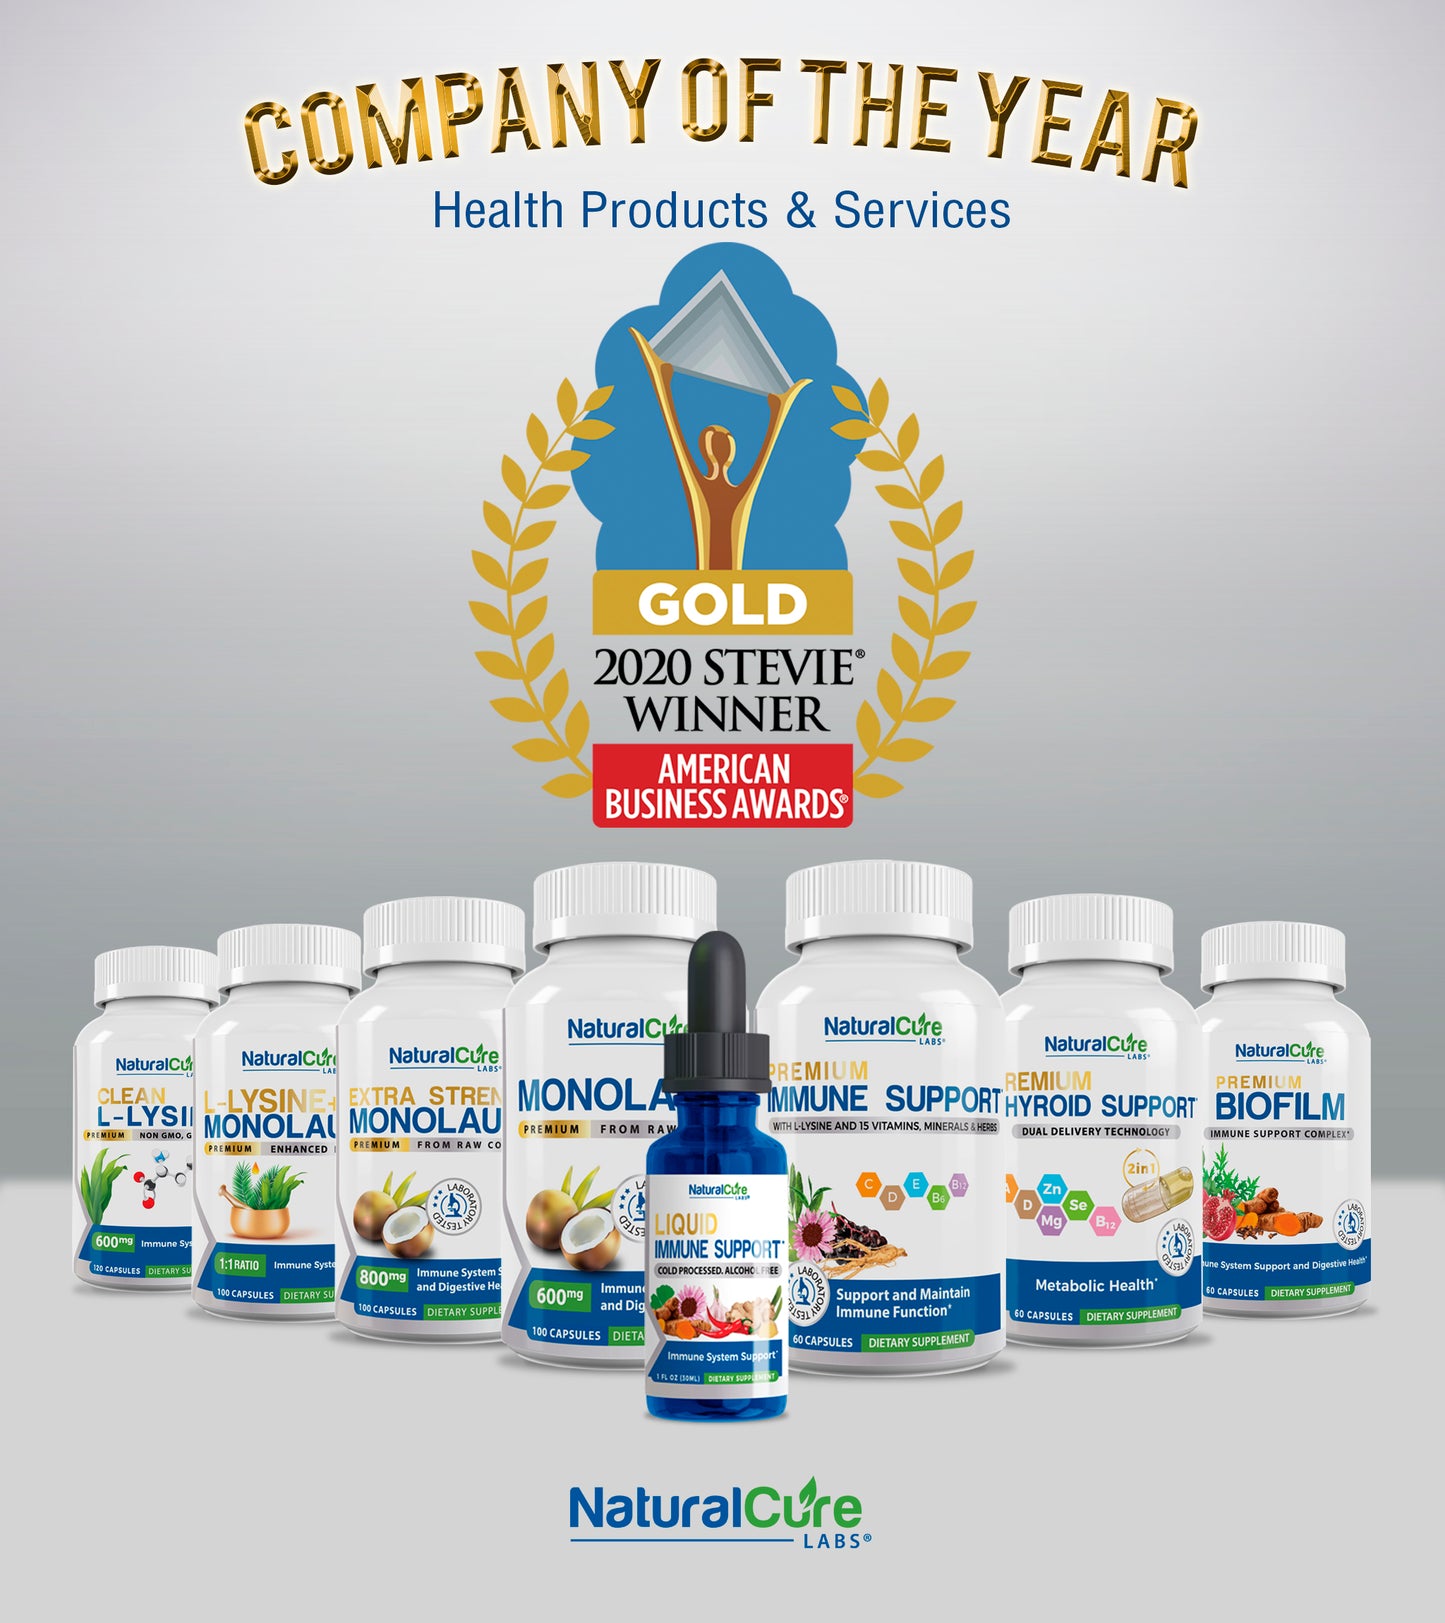 Natural Cure Labs Wins 'Company Of The Year' in 2020 American Business Awards